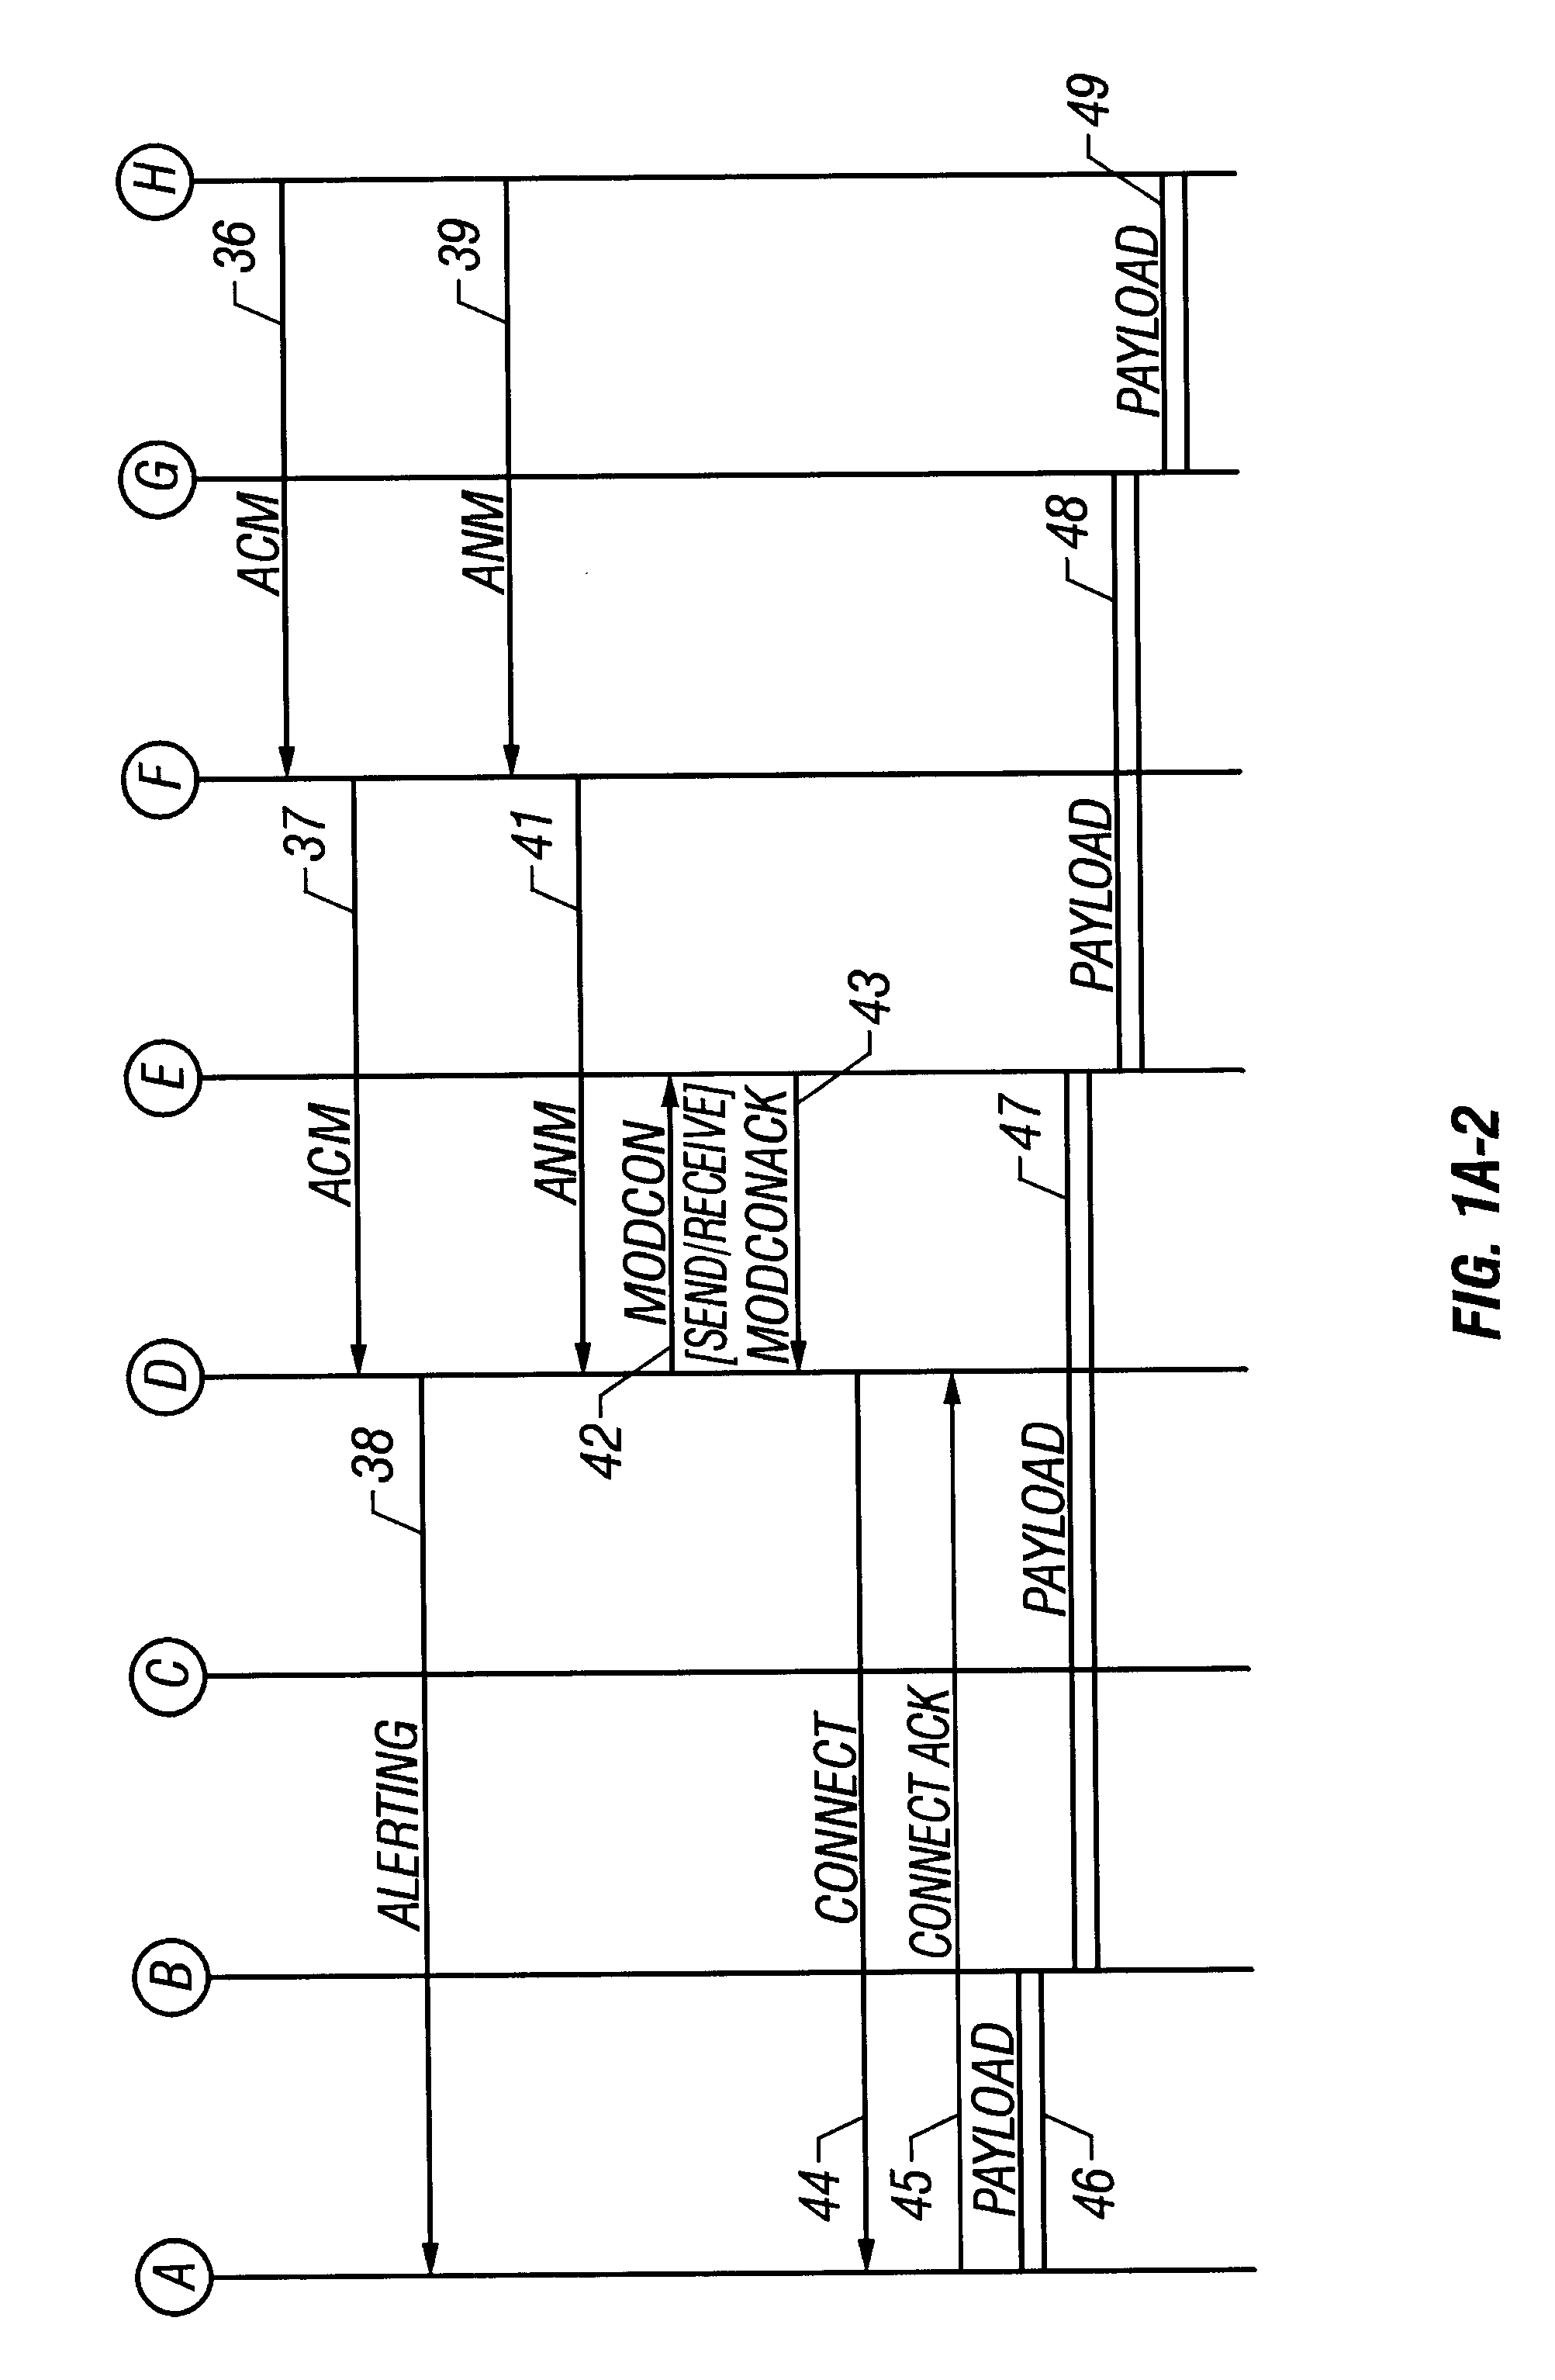 Interworking function in an internet protocol (IP)-based radio telecommunications network